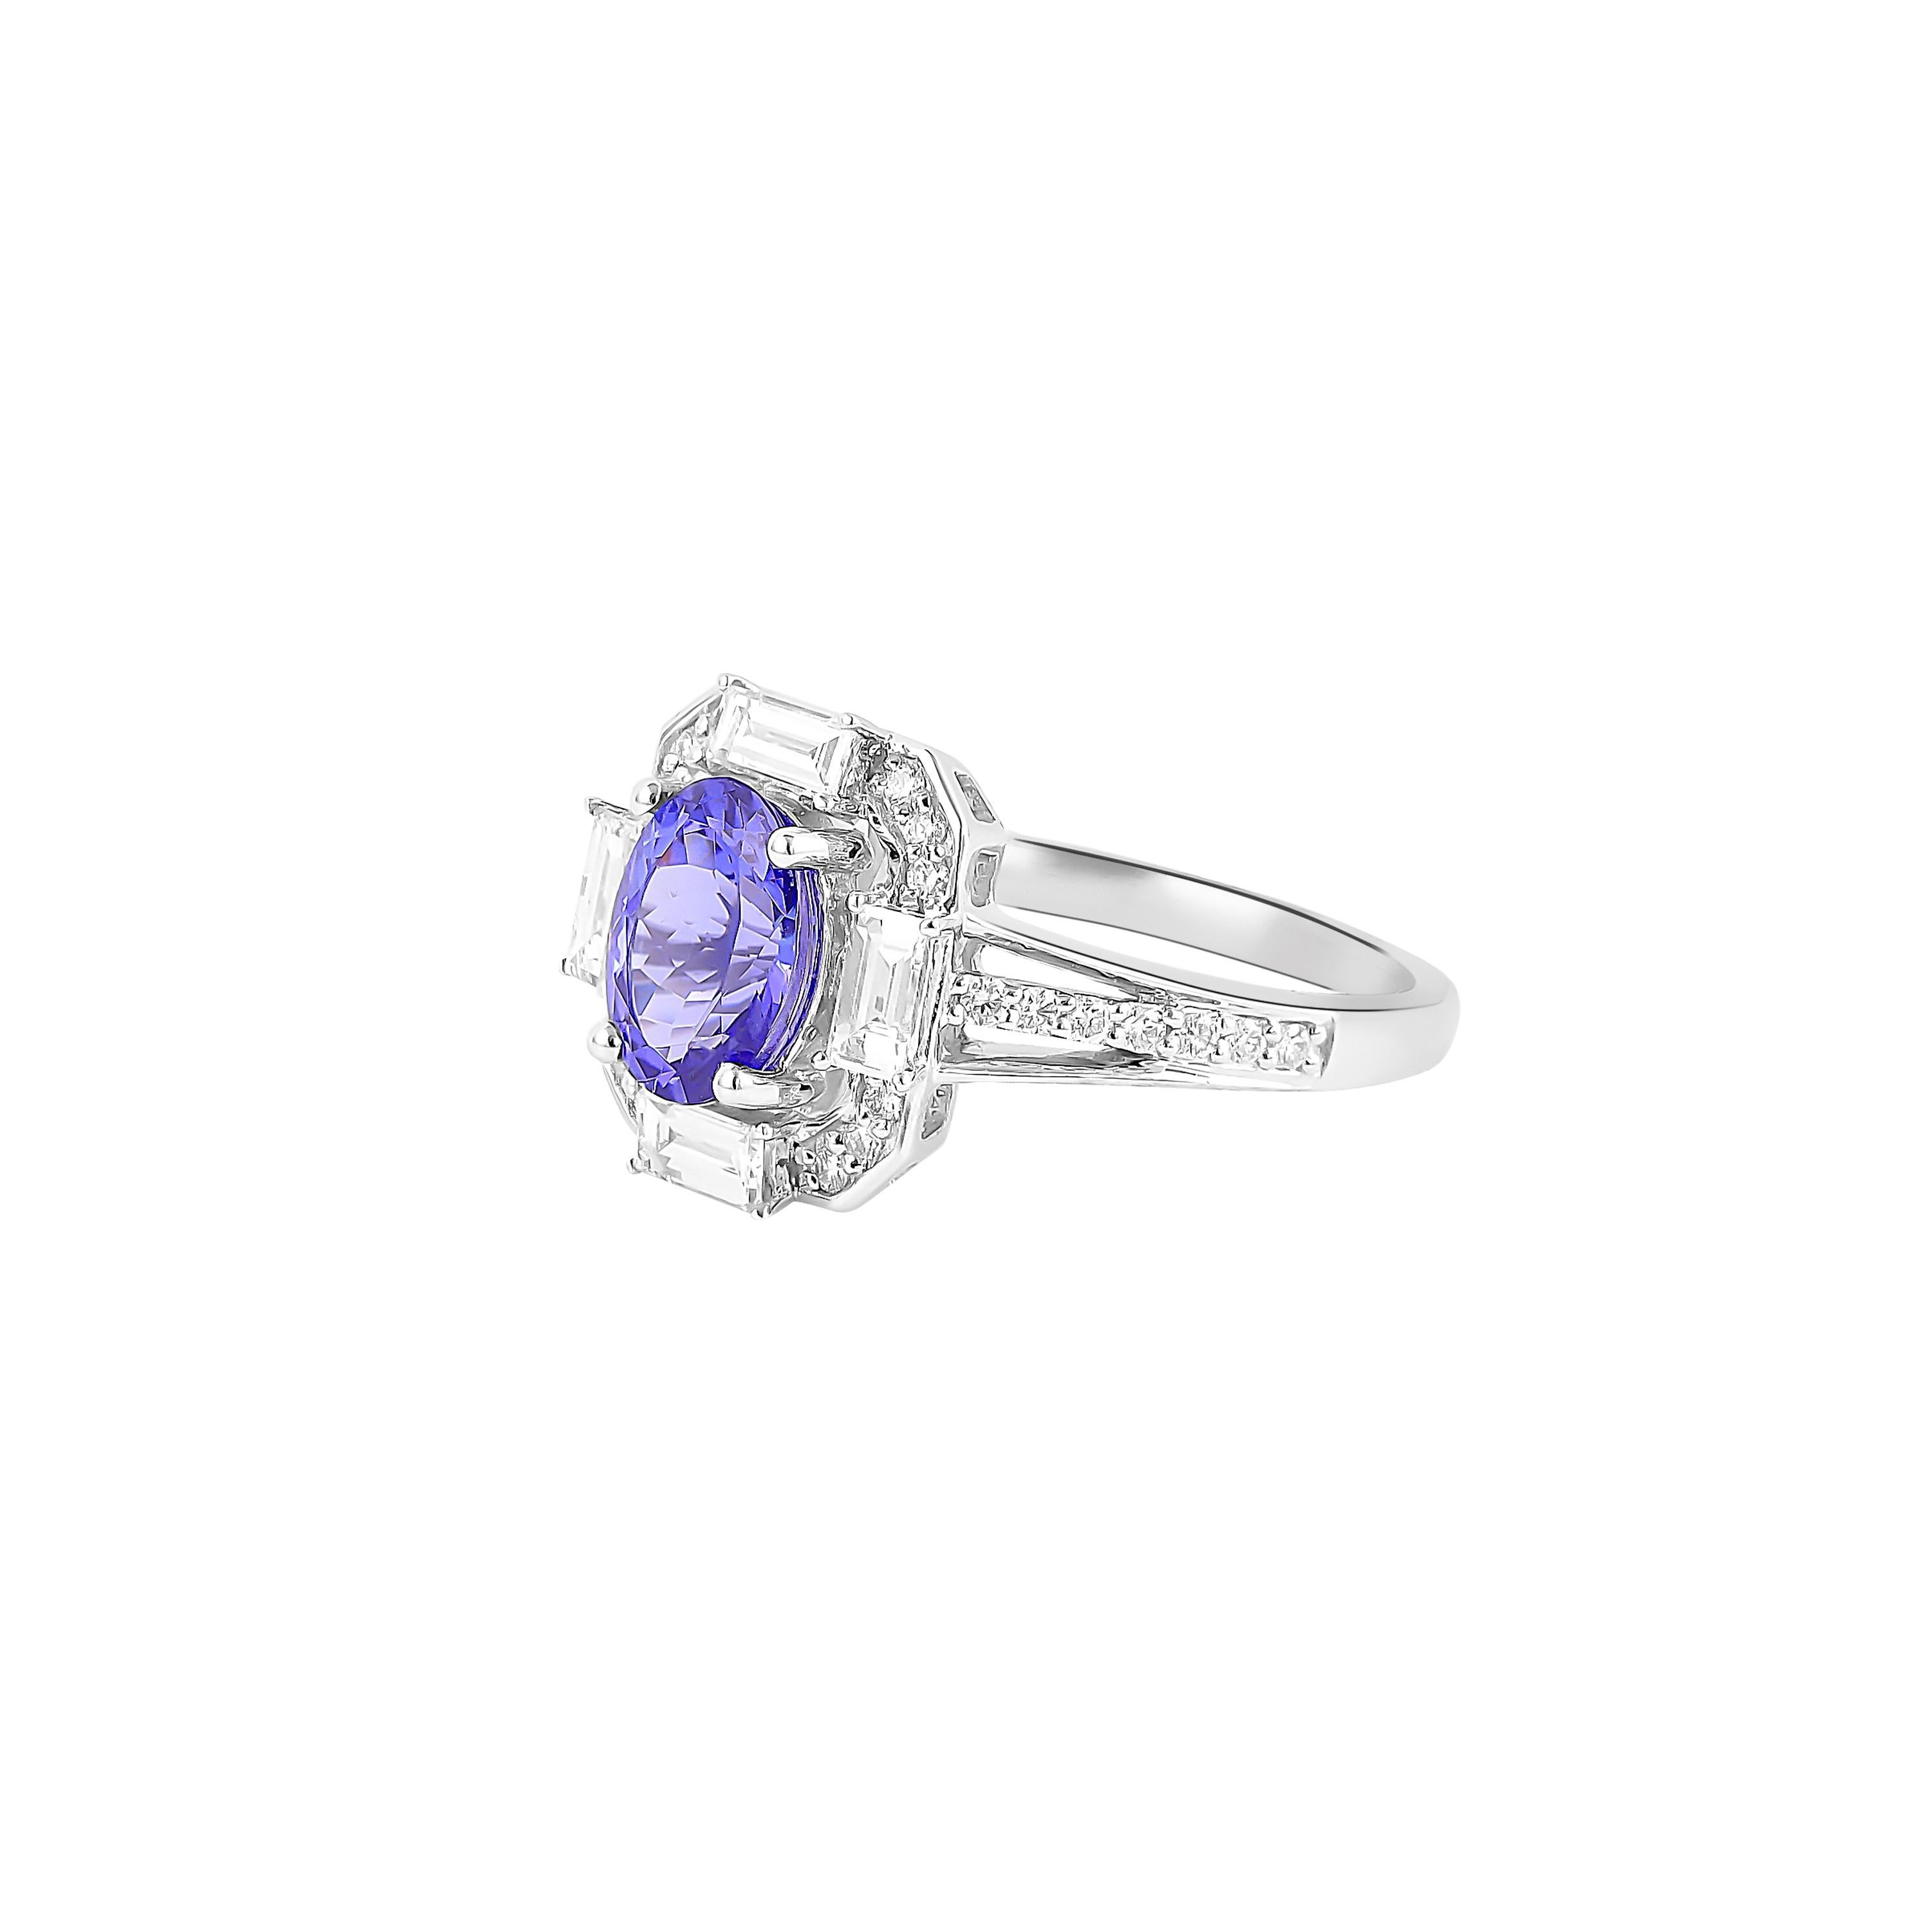 Contemporary 1.322 Carat Tanzanite Ring in 18 Karat White Gold with Diamond. For Sale